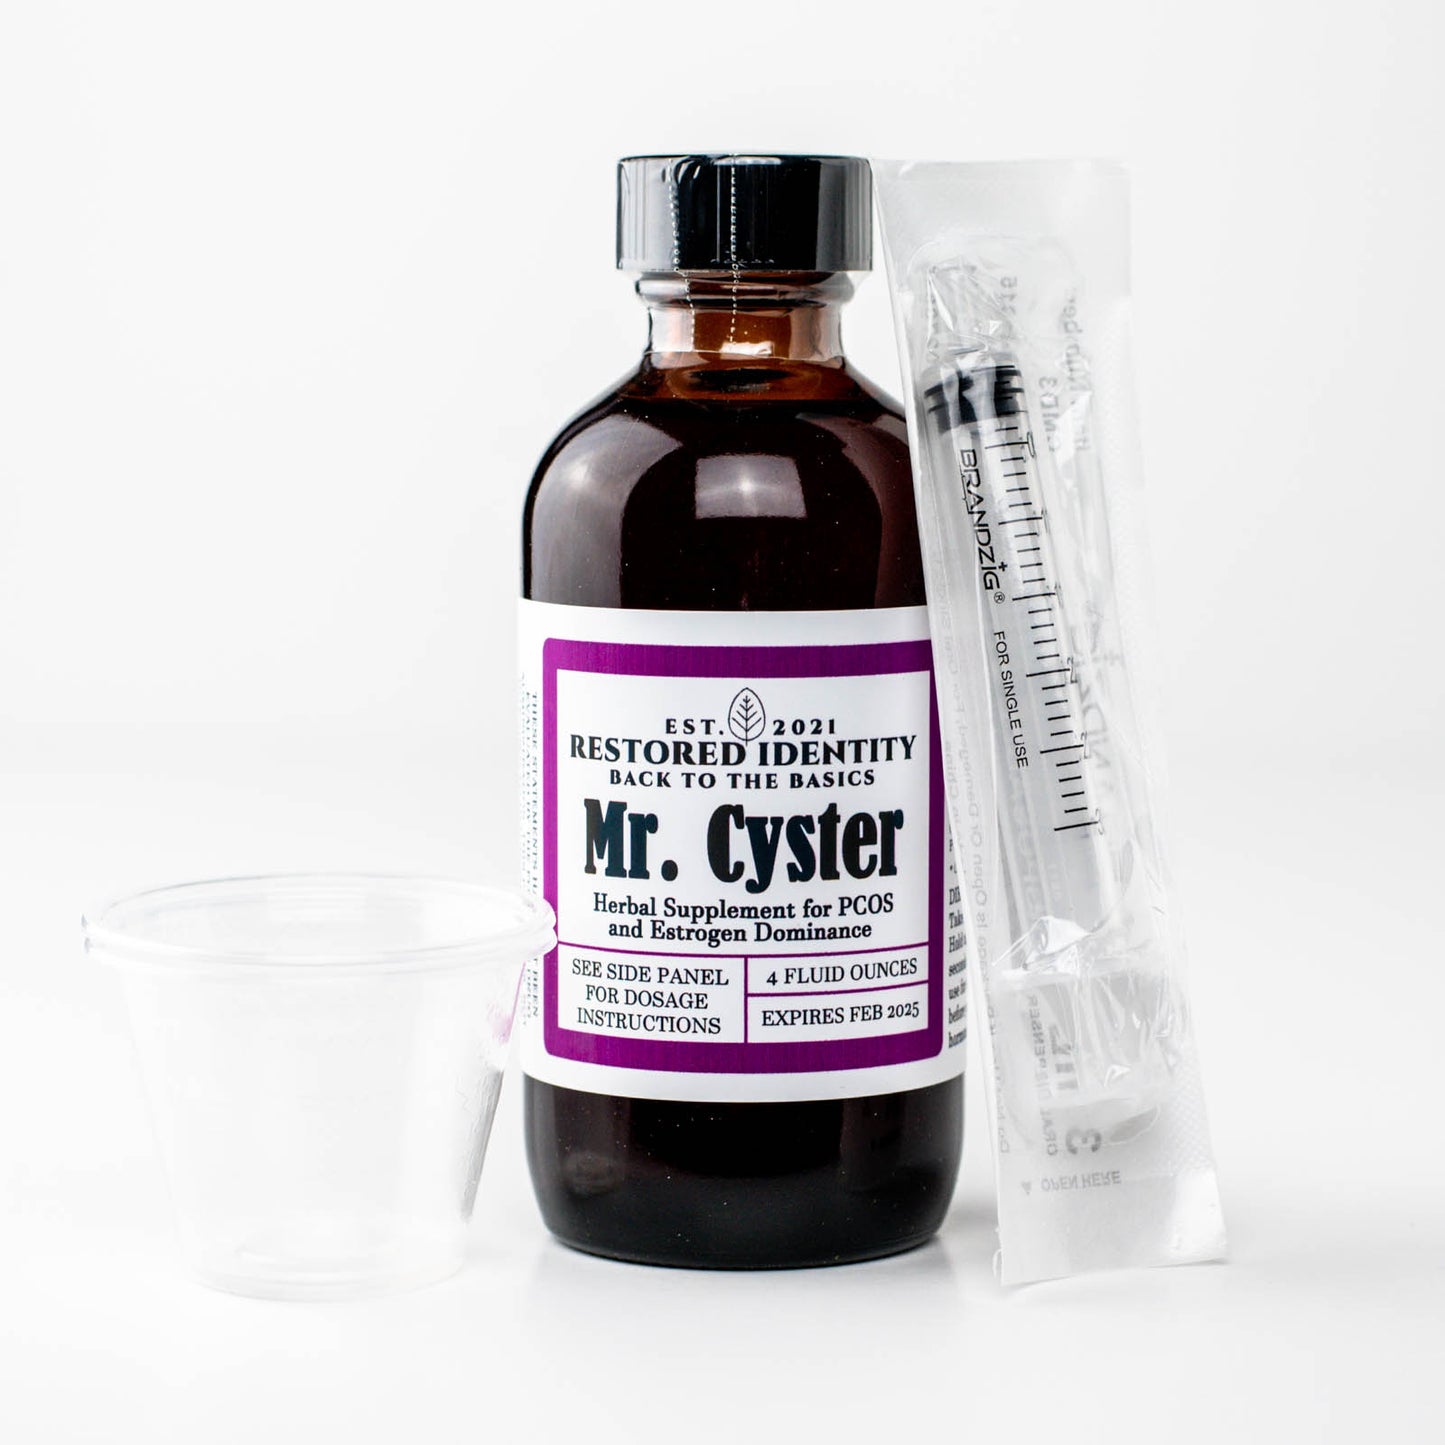 Mr. Cyster Extract or Capsules